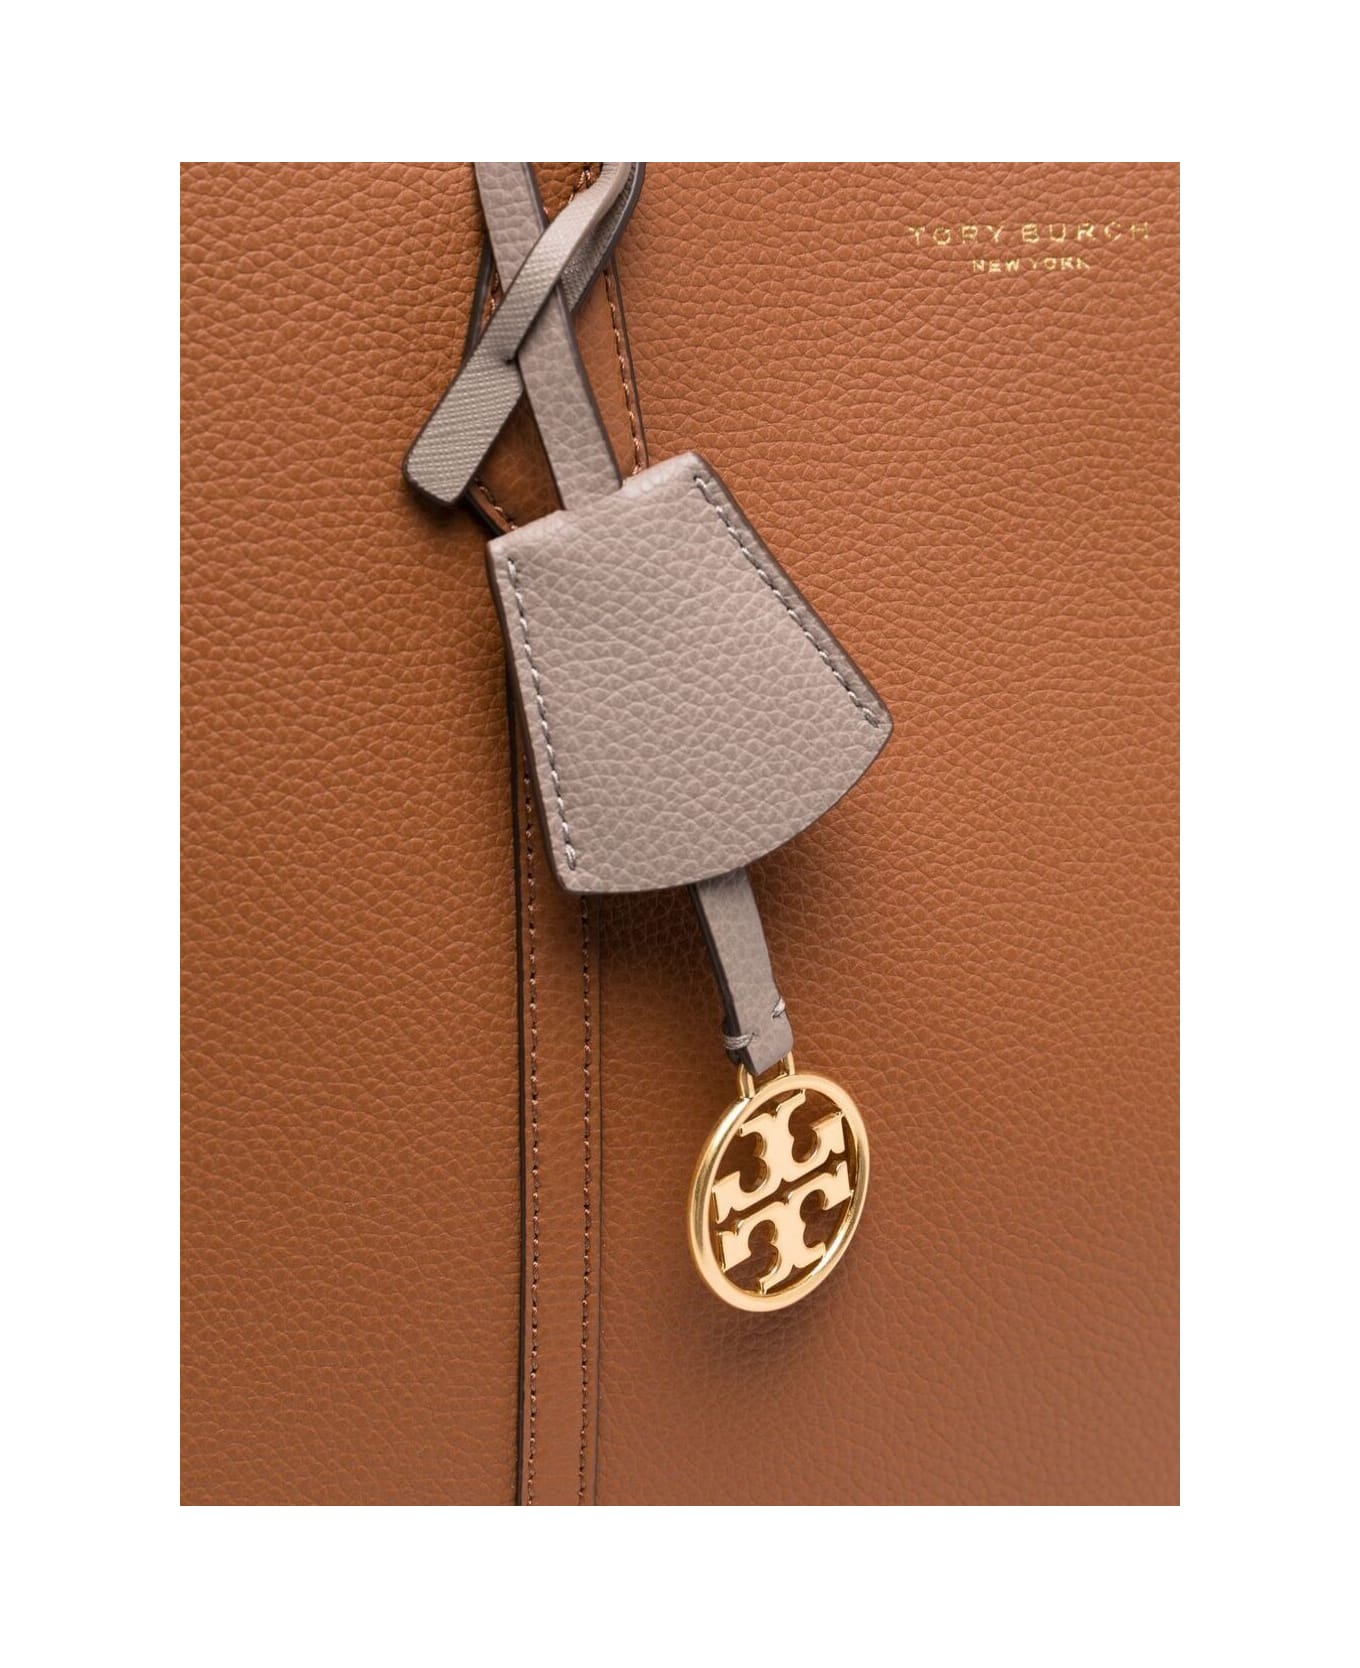 Tory Burch 'perry' Brown Shopping Bag With Charm In Grainy Leather Woman Tory Burch - Brown